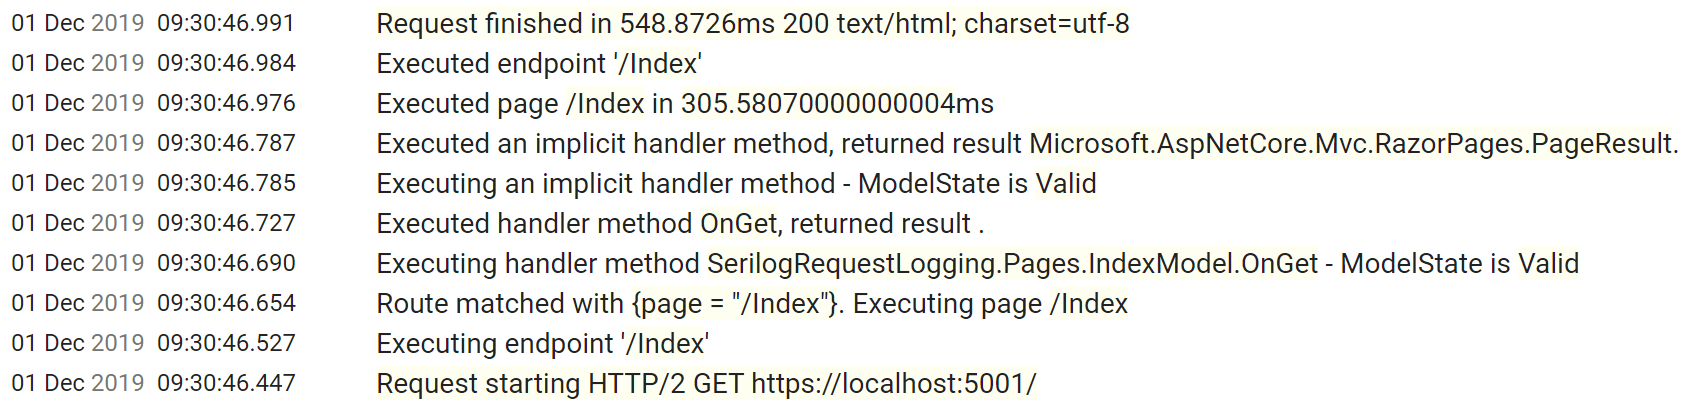 Image of many infrastructure logs without using Serilog request logging